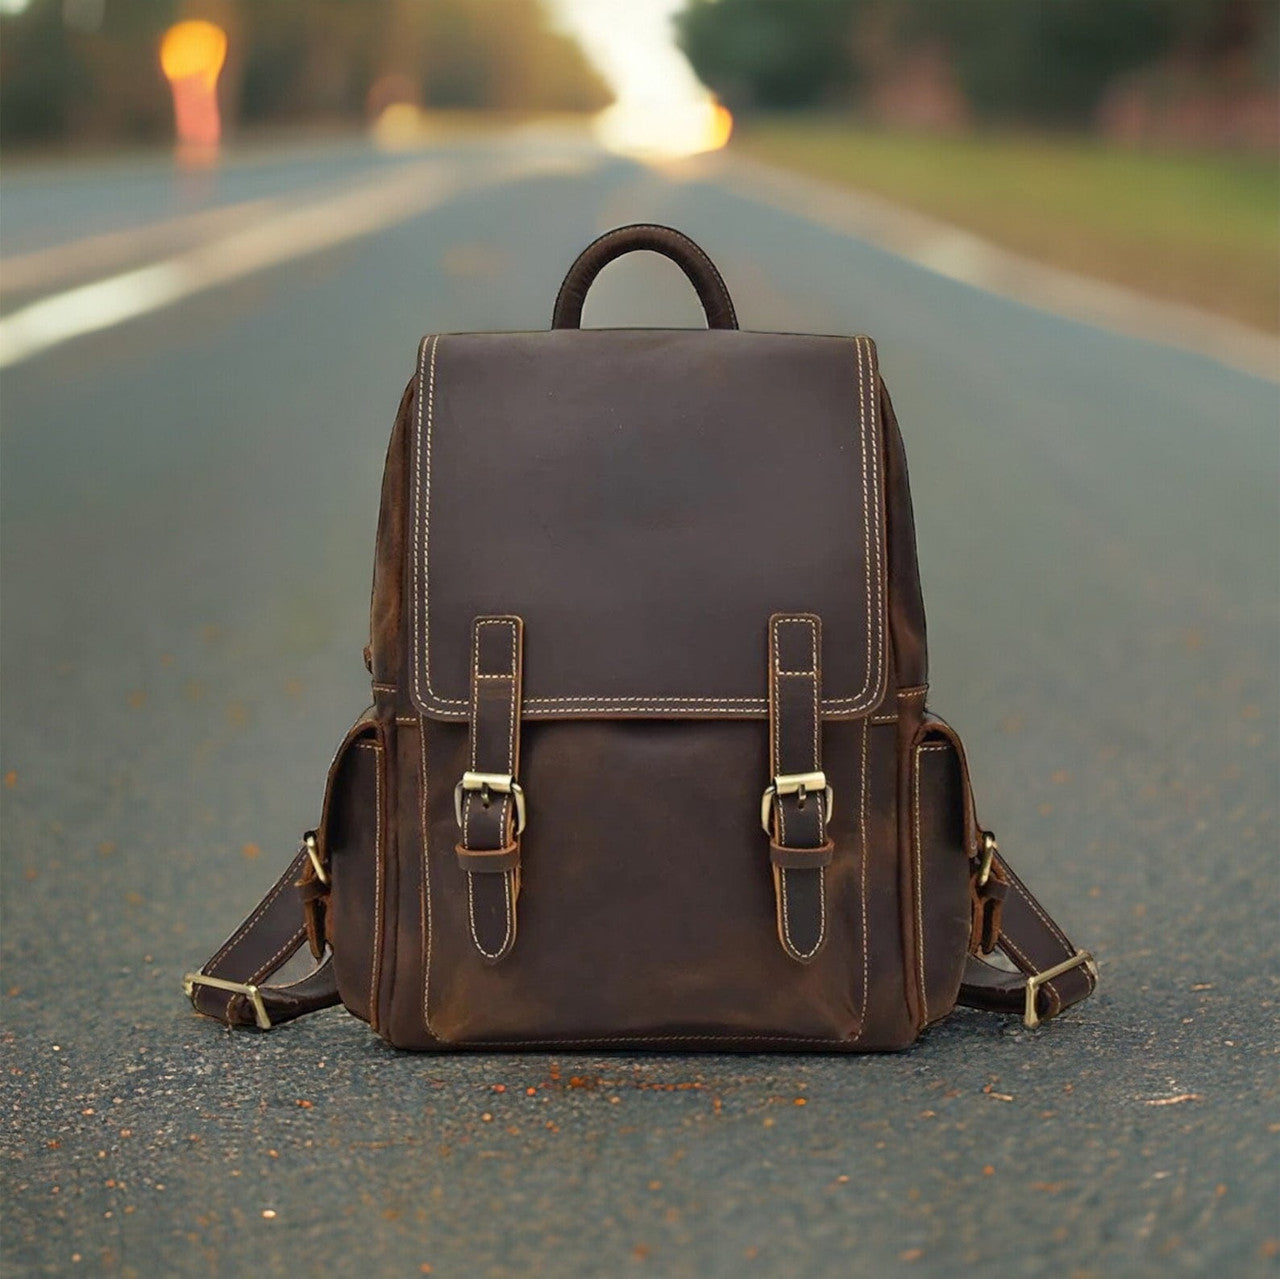 A close-up view of a sleek leather backpack, showcasing its smooth, supple texture and intricate stitching details. The rich, caramel-brown color of the leather exudes warmth and sophistication, while the polished metal hardware adds a touch of elegance. The backpack features adjustable straps and multiple compartments, suggesting functionality and practicality for everyday use.